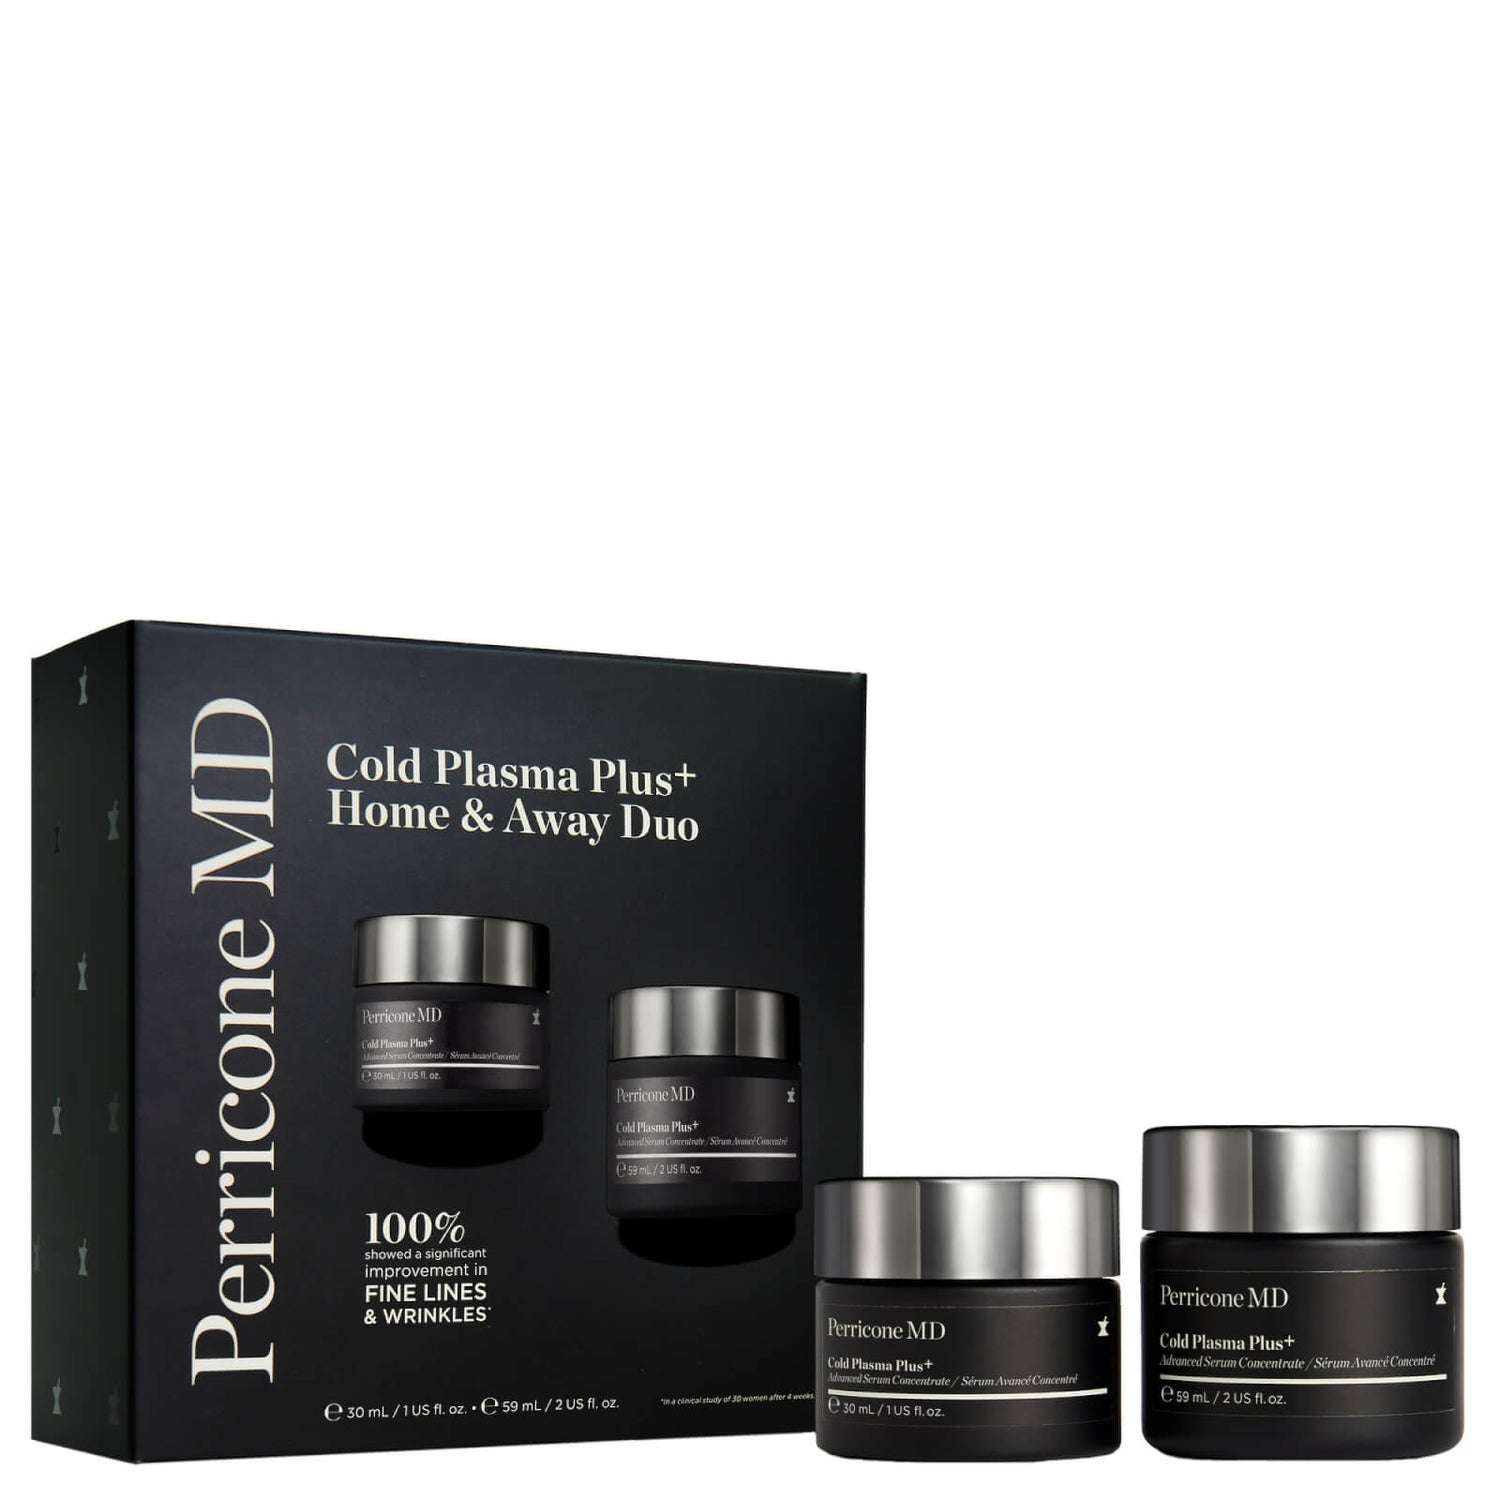 Cold Plasma Plus+ Advanced Serum Concentrate Home & Away Duo (worth £347)